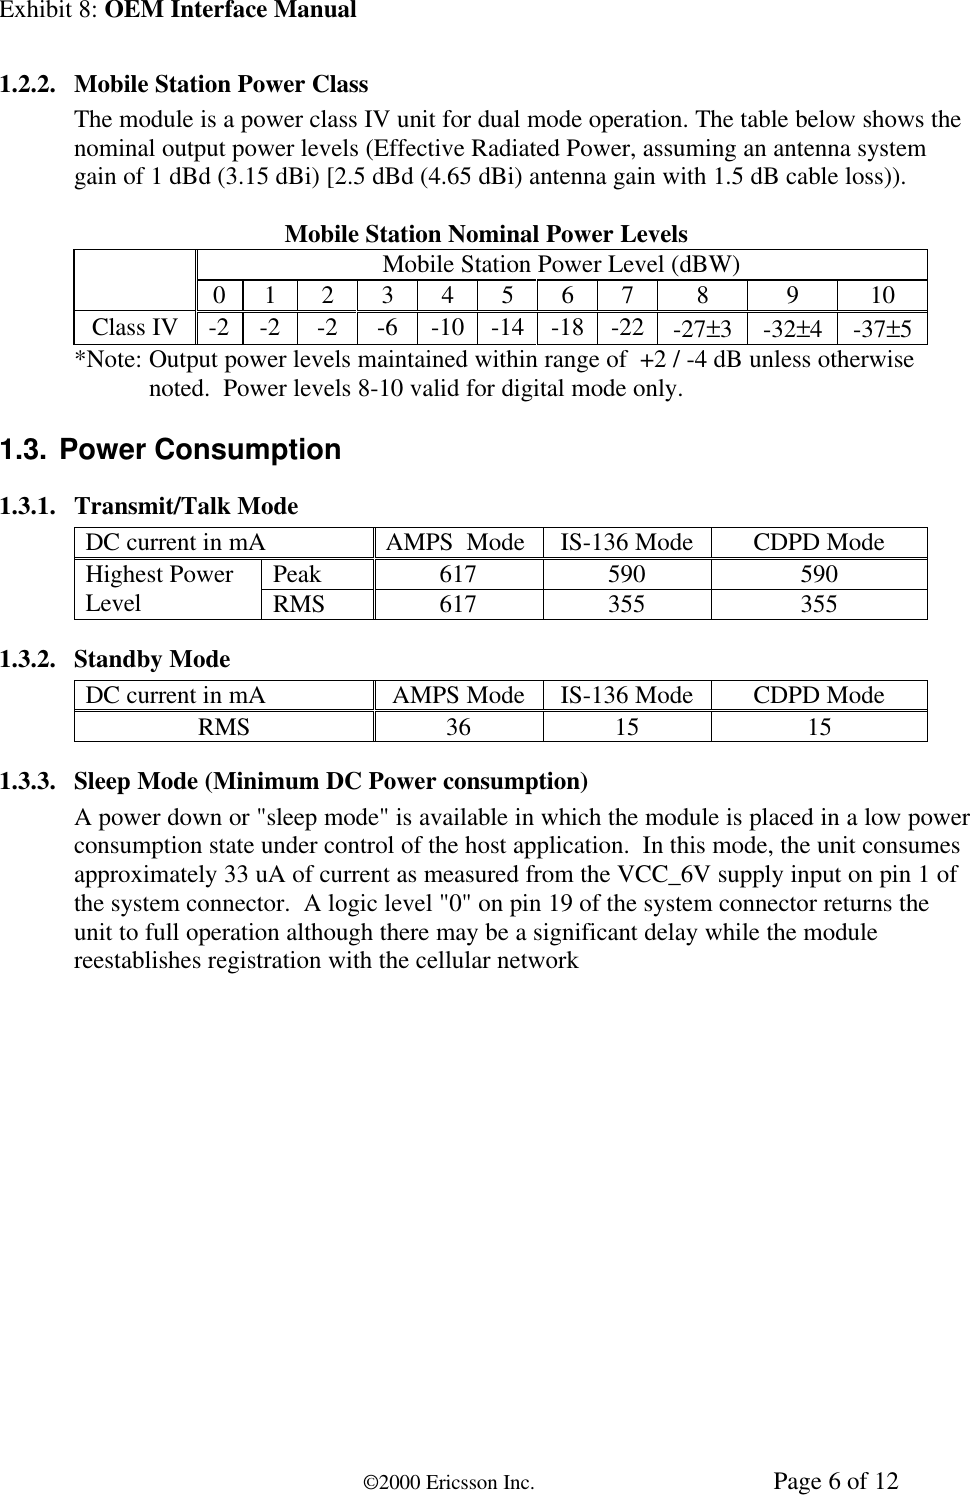 Exhibit 8: OEM Interface Manual©2000 Ericsson Inc. Page 6 of 121.2.2. Mobile Station Power ClassThe module is a power class IV unit for dual mode operation. The table below shows thenominal output power levels (Effective Radiated Power, assuming an antenna systemgain of 1 dBd (3.15 dBi) [2.5 dBd (4.65 dBi) antenna gain with 1.5 dB cable loss)).Mobile Station Nominal Power LevelsMobile Station Power Level (dBW)0 1 2 3 4 5 6 7 8 9 10Class IV -2 -2 -2 -6 -10 -14 -18 -22 -27±3-32±4-37±5*Note: Output power levels maintained within range of  +2 / -4 dB unless otherwisenoted.  Power levels 8-10 valid for digital mode only.1.3. Power Consumption1.3.1. Transmit/Talk ModeDC current in mA AMPS  Mode IS-136 Mode CDPD ModePeak 617 590 590Highest PowerLevel RMS 617 355 3551.3.2. Standby ModeDC current in mA AMPS Mode IS-136 Mode CDPD ModeRMS 36 15 151.3.3. Sleep Mode (Minimum DC Power consumption)A power down or &quot;sleep mode&quot; is available in which the module is placed in a low powerconsumption state under control of the host application.  In this mode, the unit consumesapproximately 33 uA of current as measured from the VCC_6V supply input on pin 1 ofthe system connector.  A logic level &quot;0&quot; on pin 19 of the system connector returns theunit to full operation although there may be a significant delay while the modulereestablishes registration with the cellular network